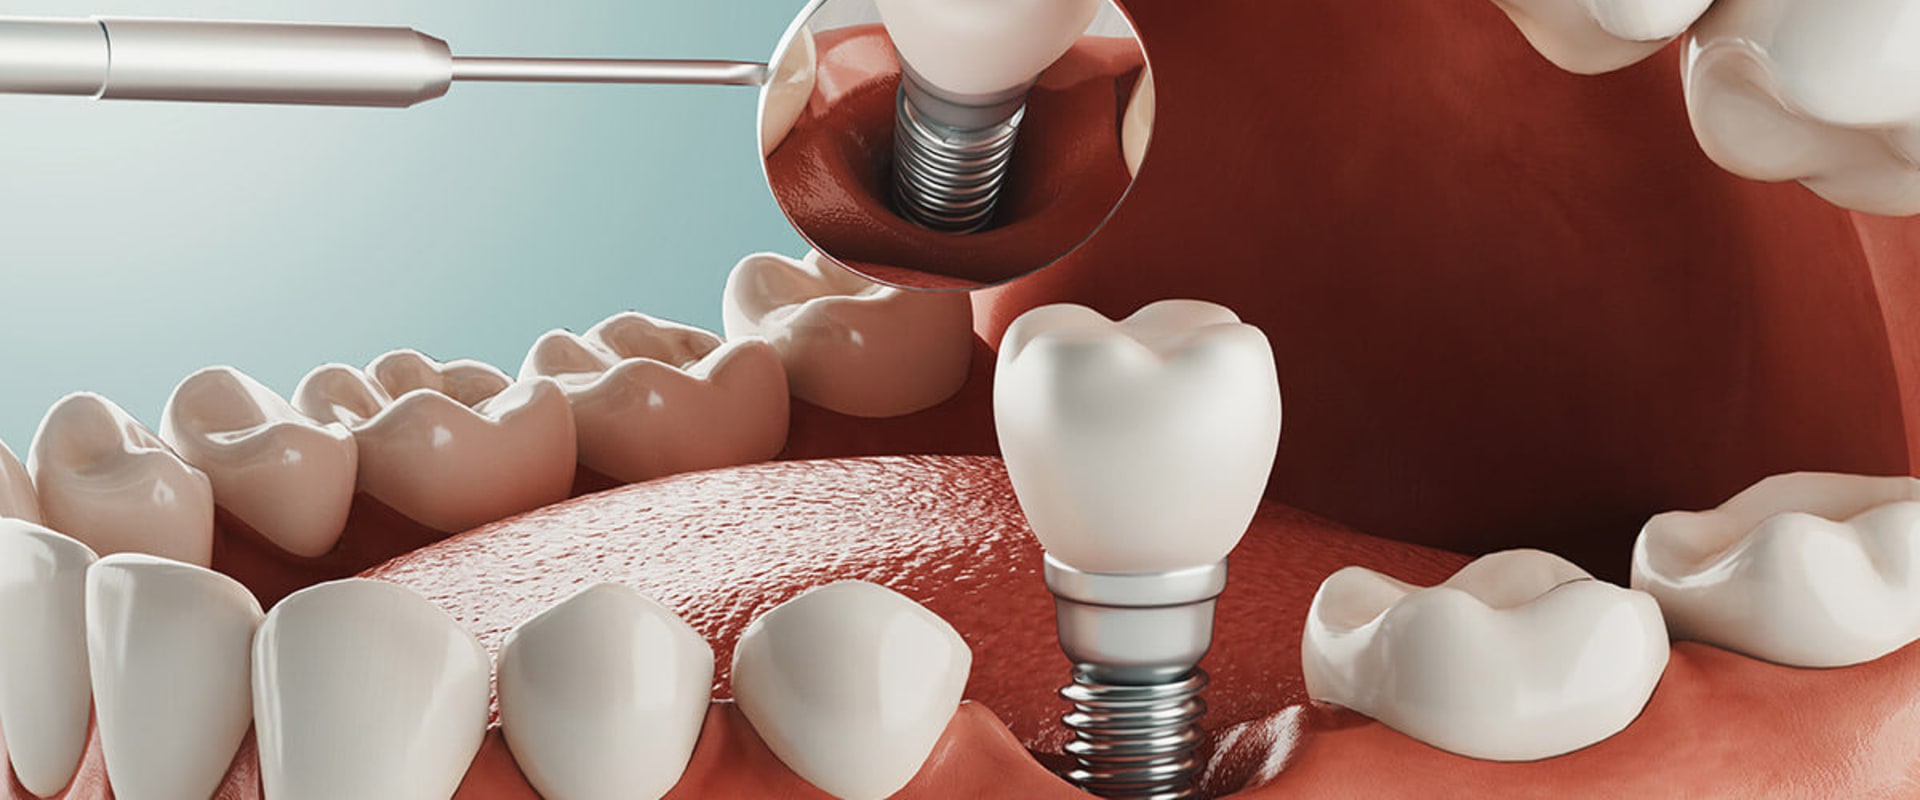 Exploring Alternatives to All-on-Four Dental Implants